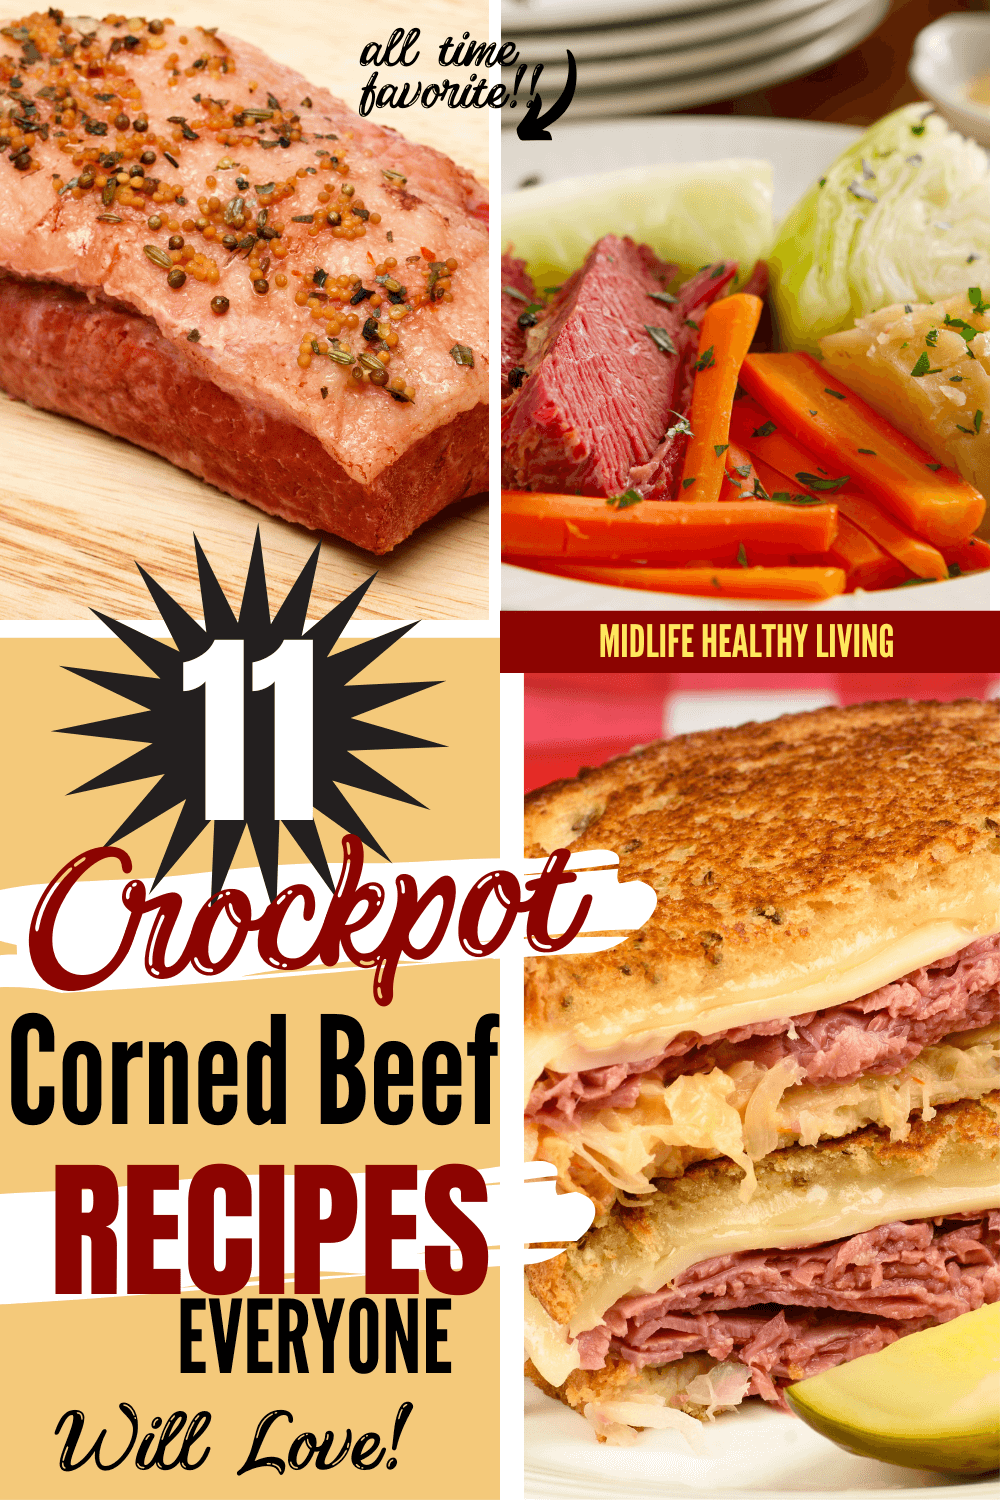 crockpot corned beef recipes that everyone will love